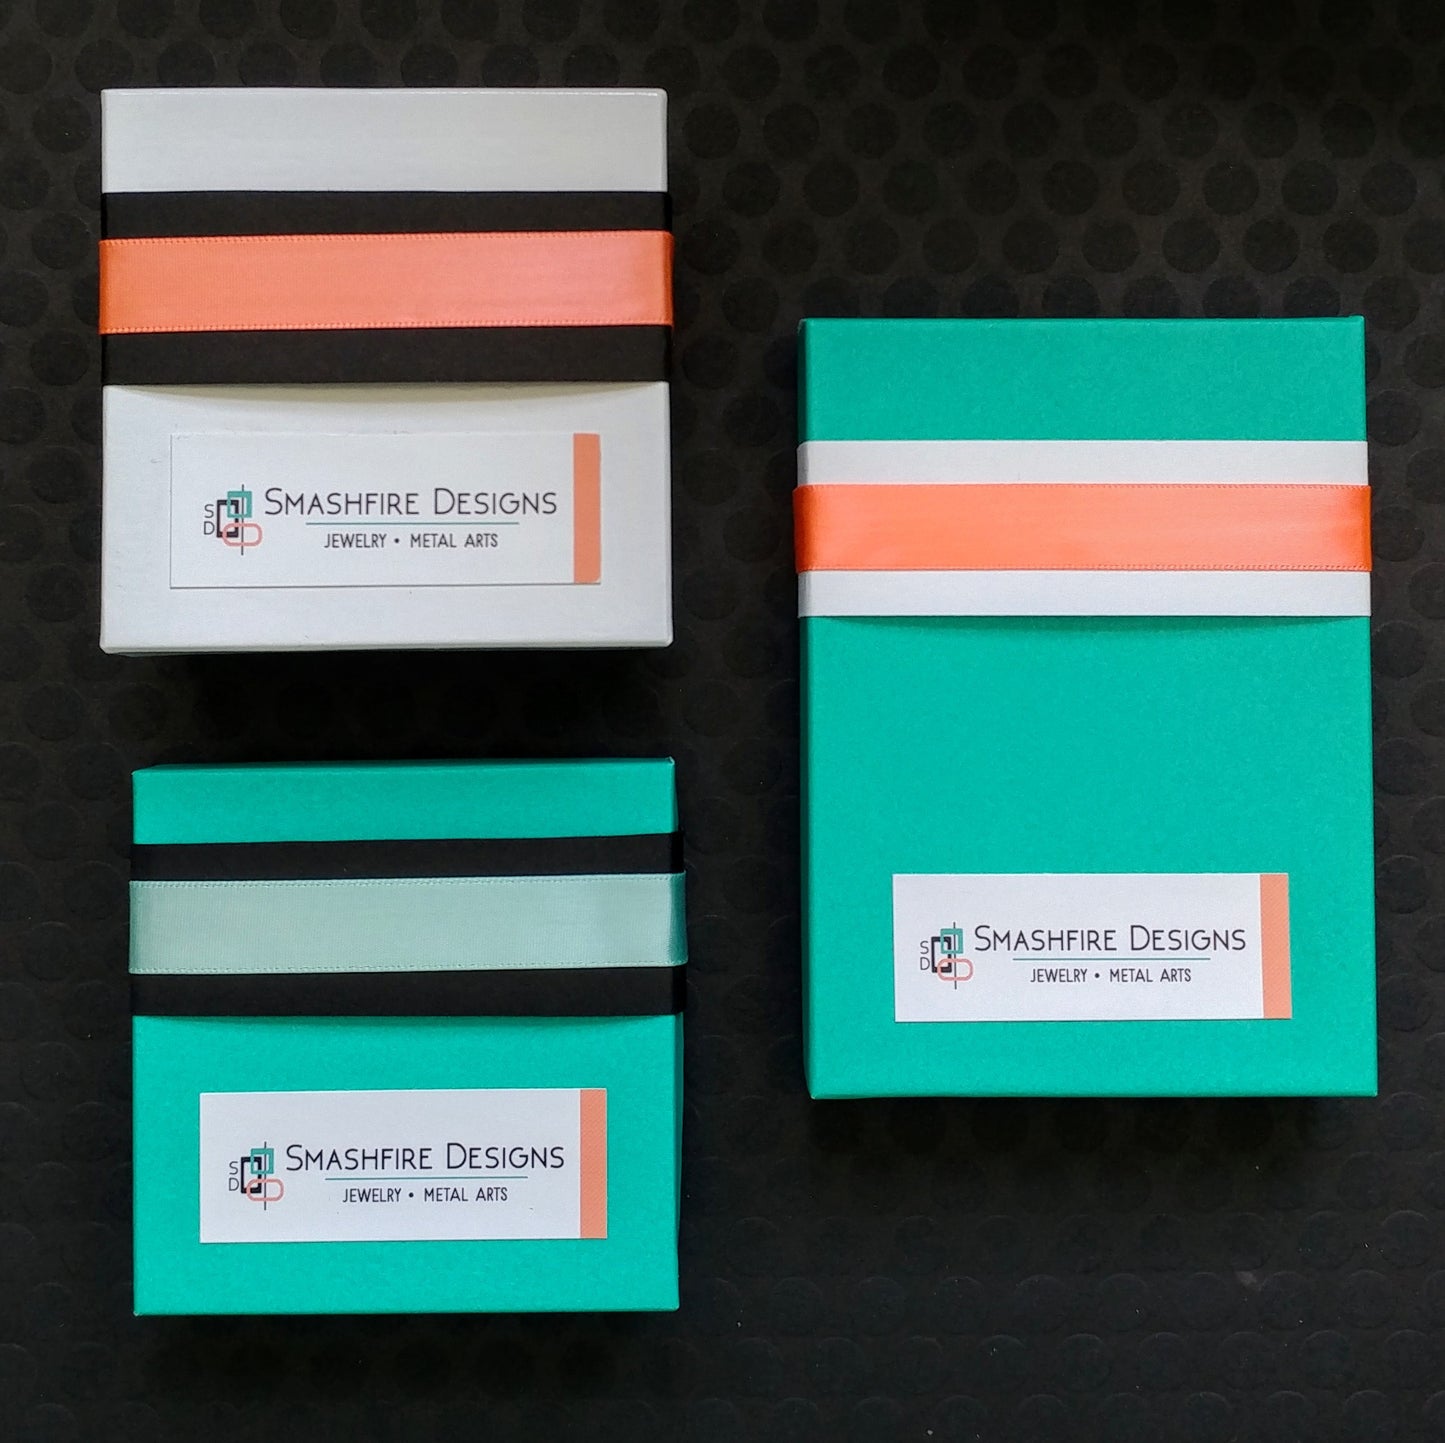 Smashfire Designs packaging showing teal and coral